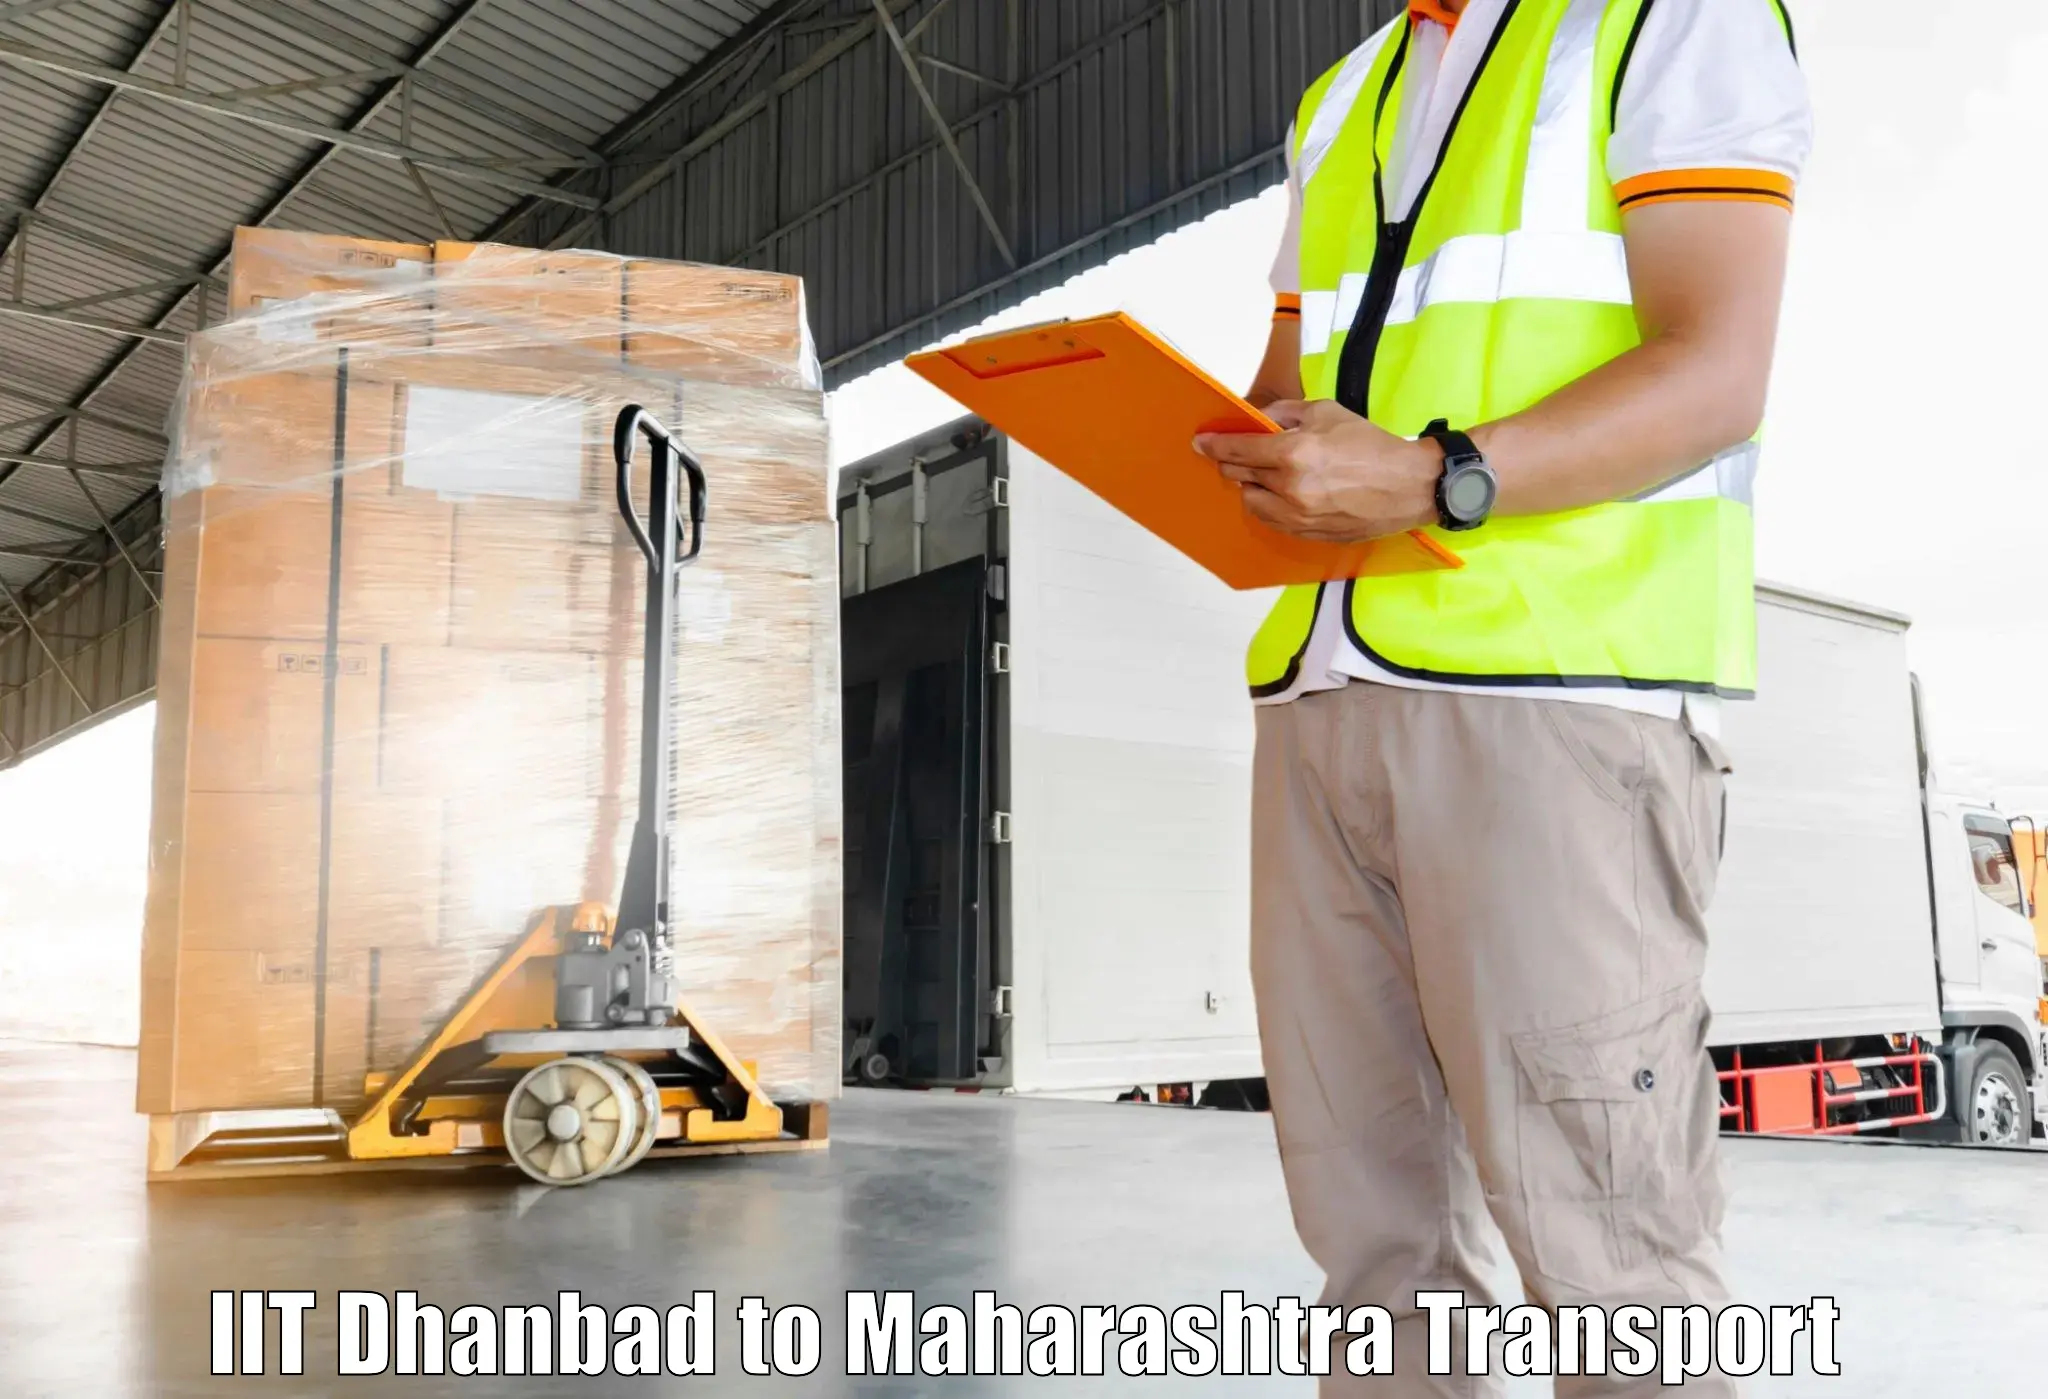 Nationwide transport services IIT Dhanbad to Vita